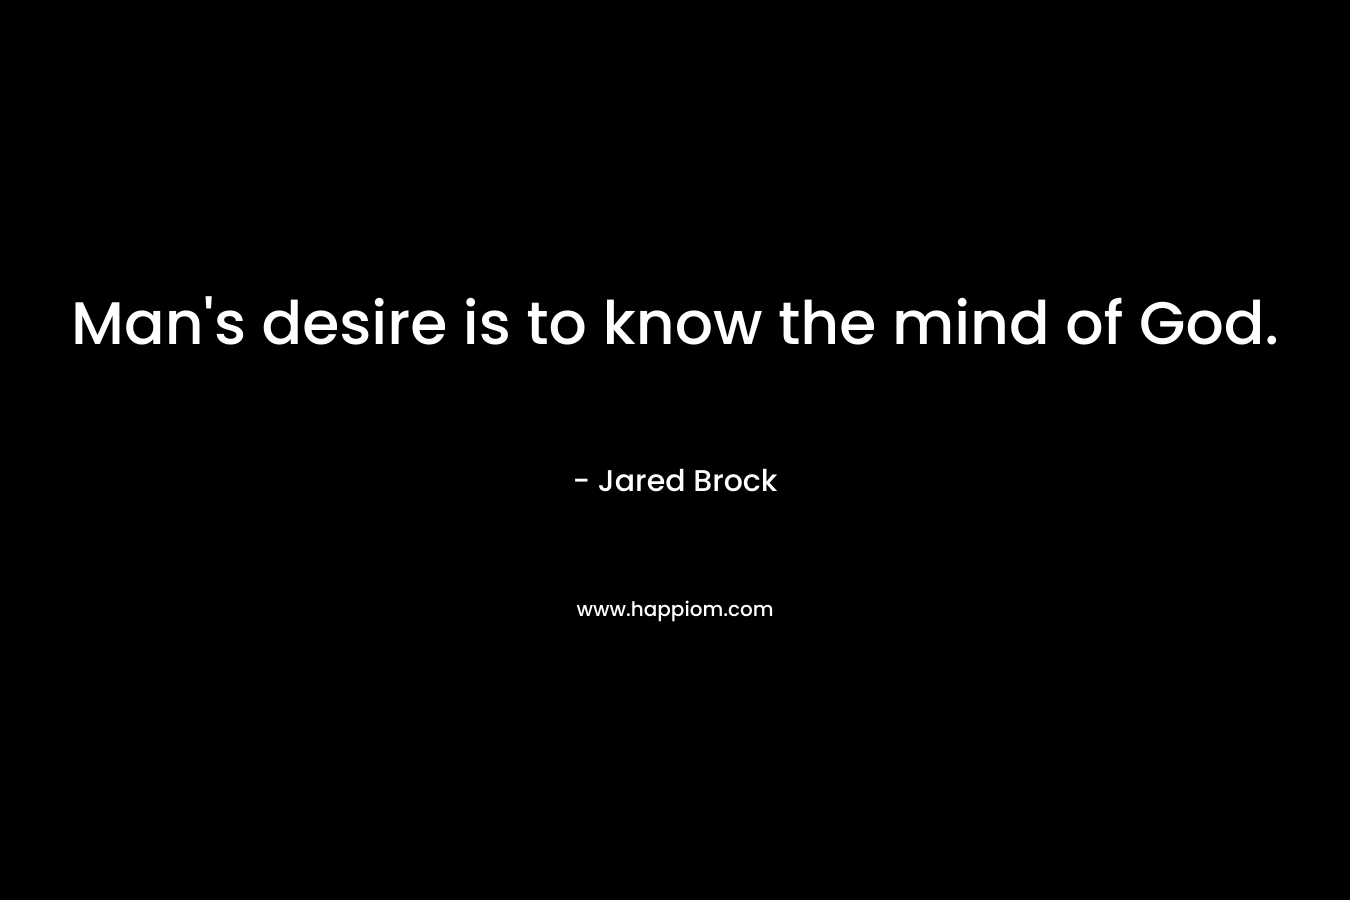 Man’s desire is to know the mind of God. – Jared Brock